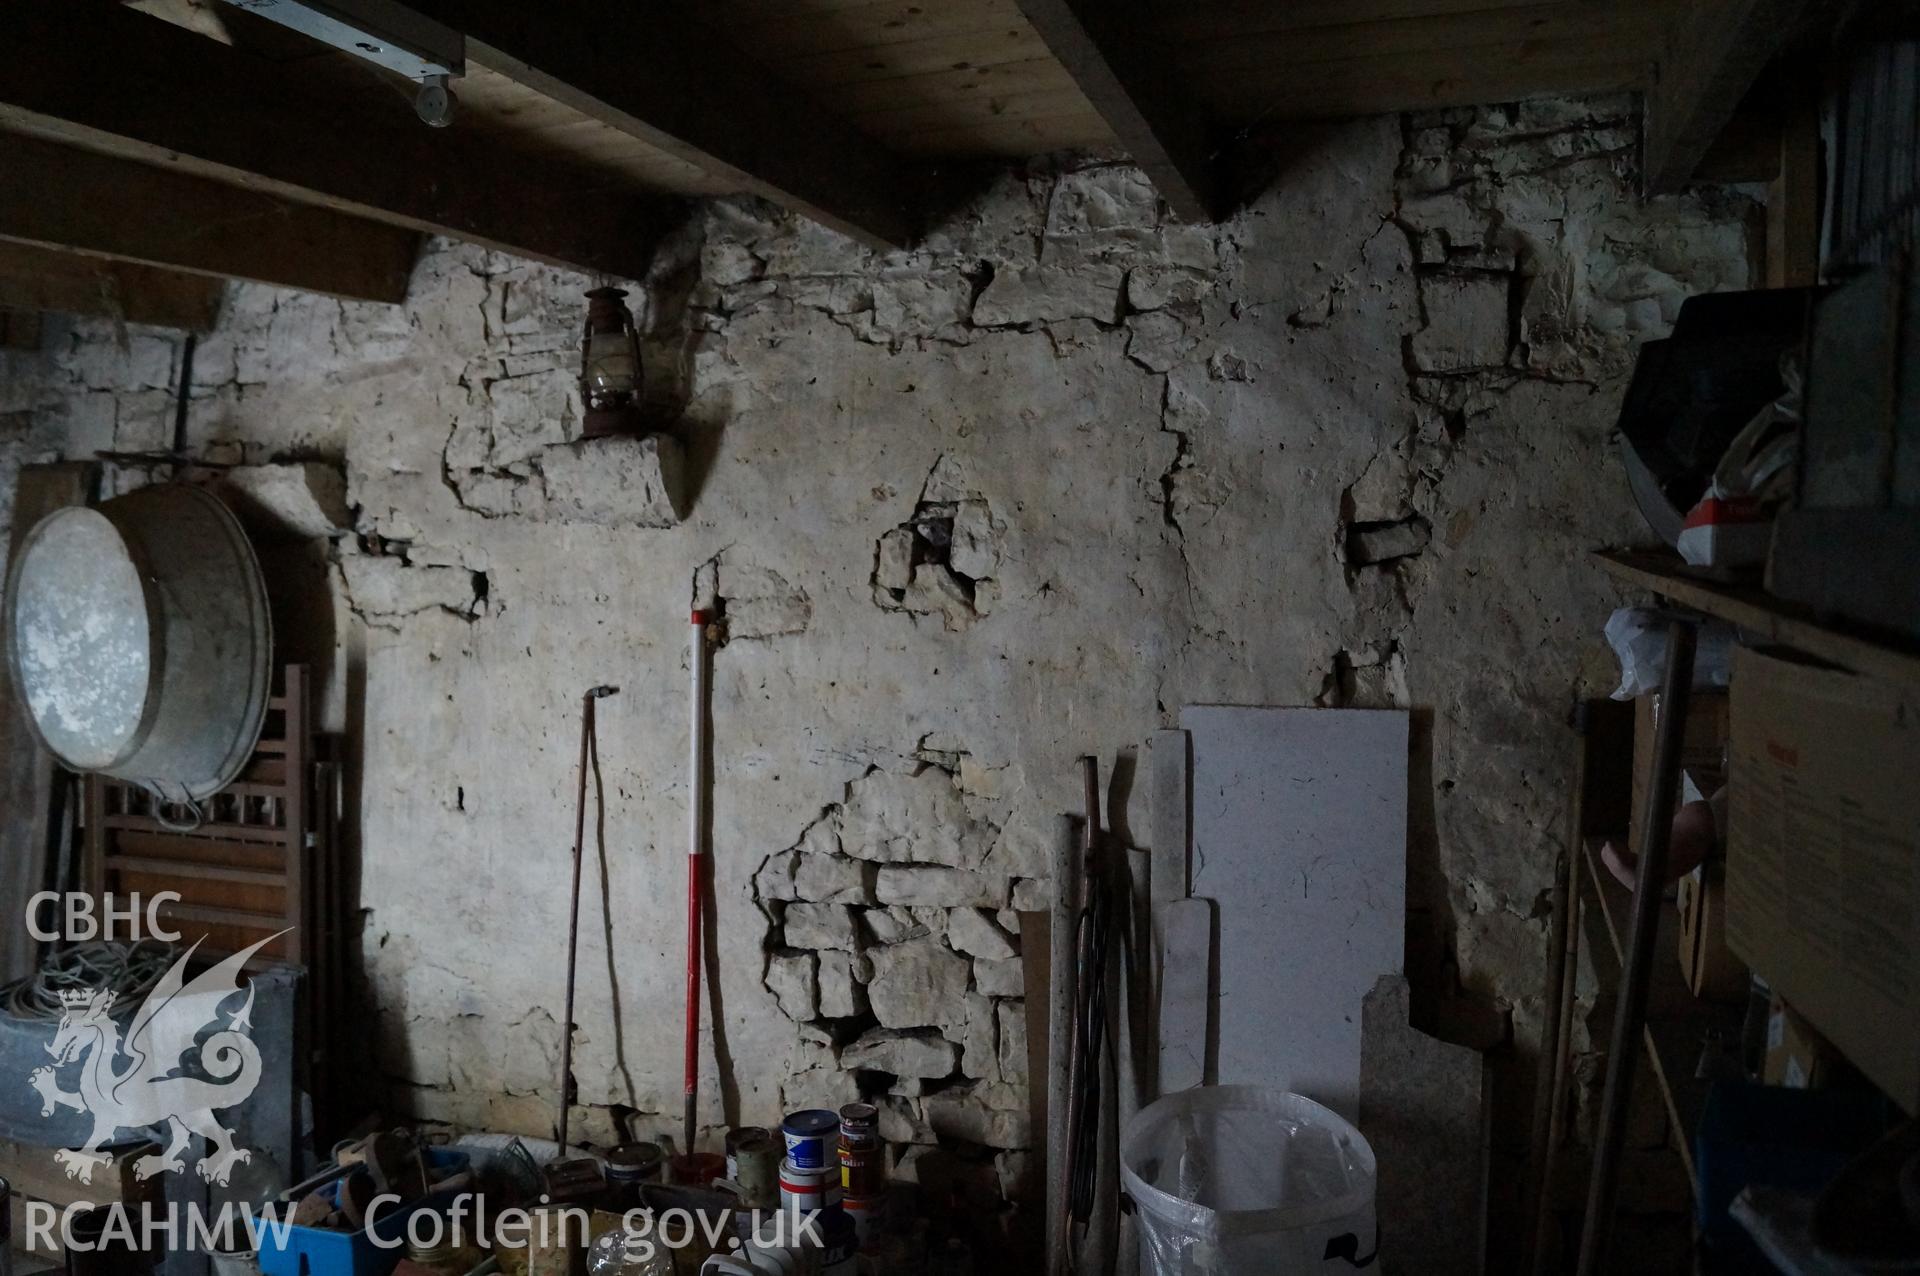 'Internal view looking northwest at the eastern end of northern wall of barn' at Rowley Court, Llantwit Major. Photograph & description by Jenny Hall & Paul Sambrook of Trysor, 25th May 2017.